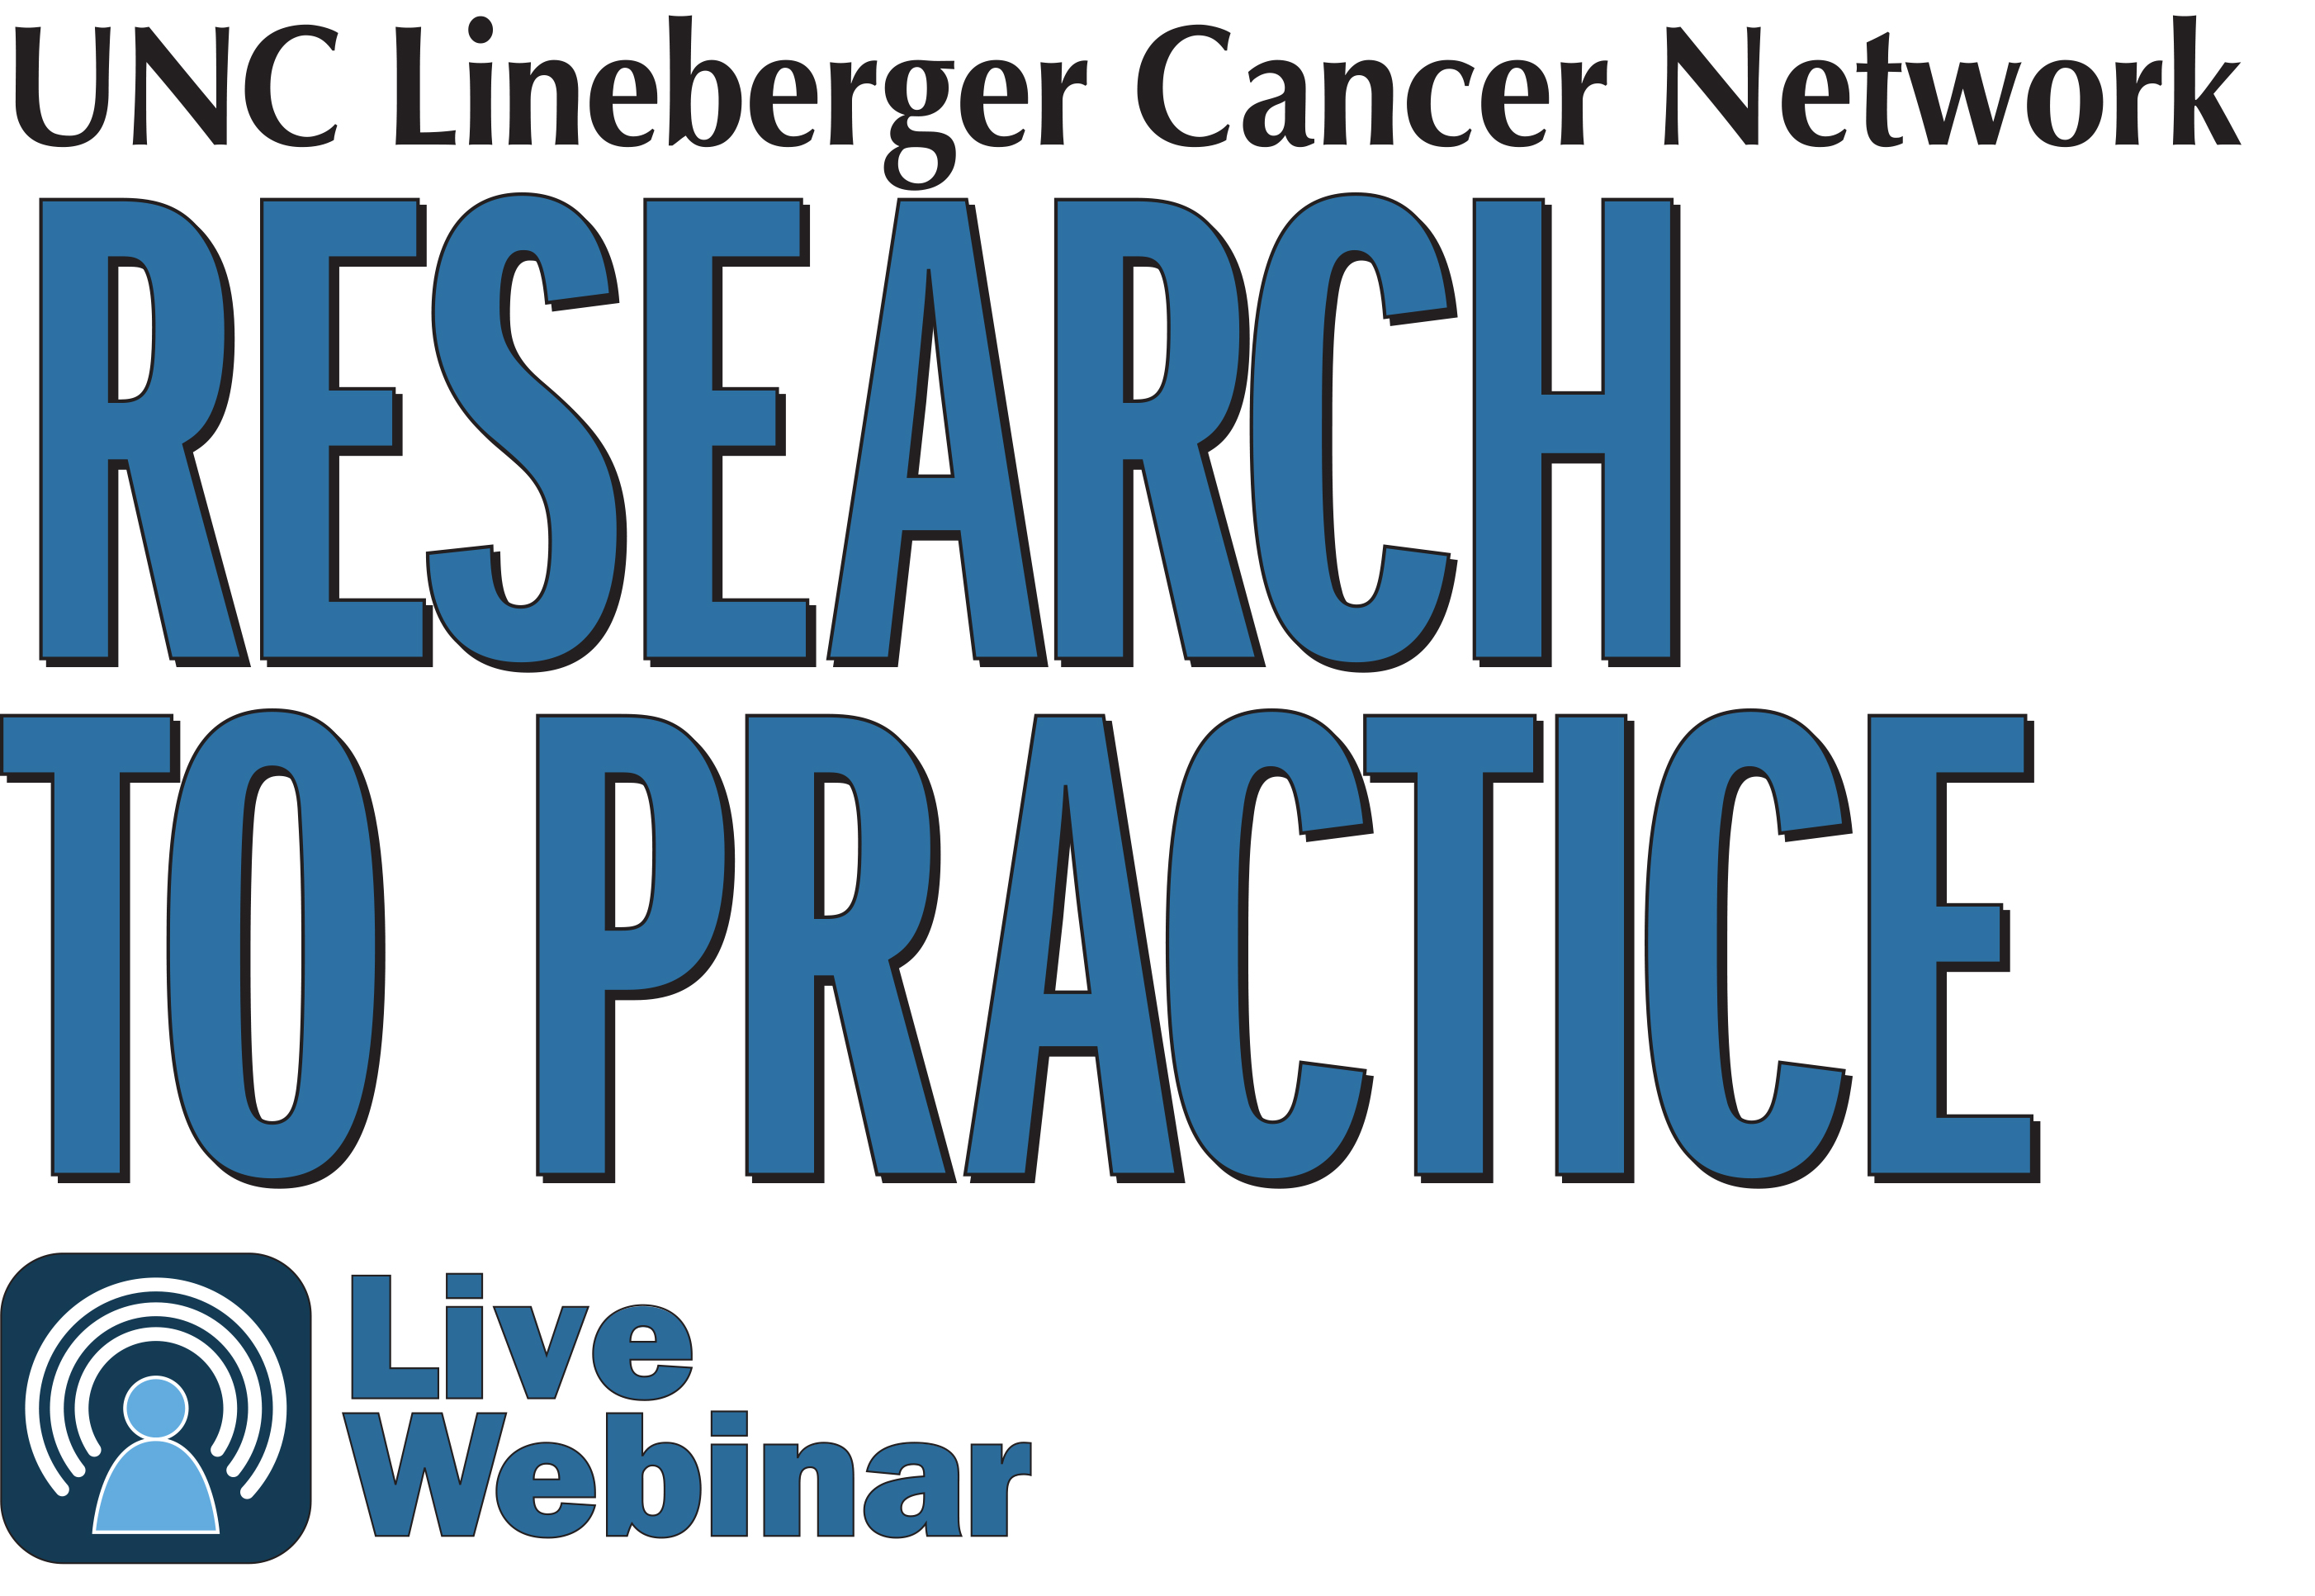 UNC Lineberger Cancer Network Presents a Research to Practice Webinar